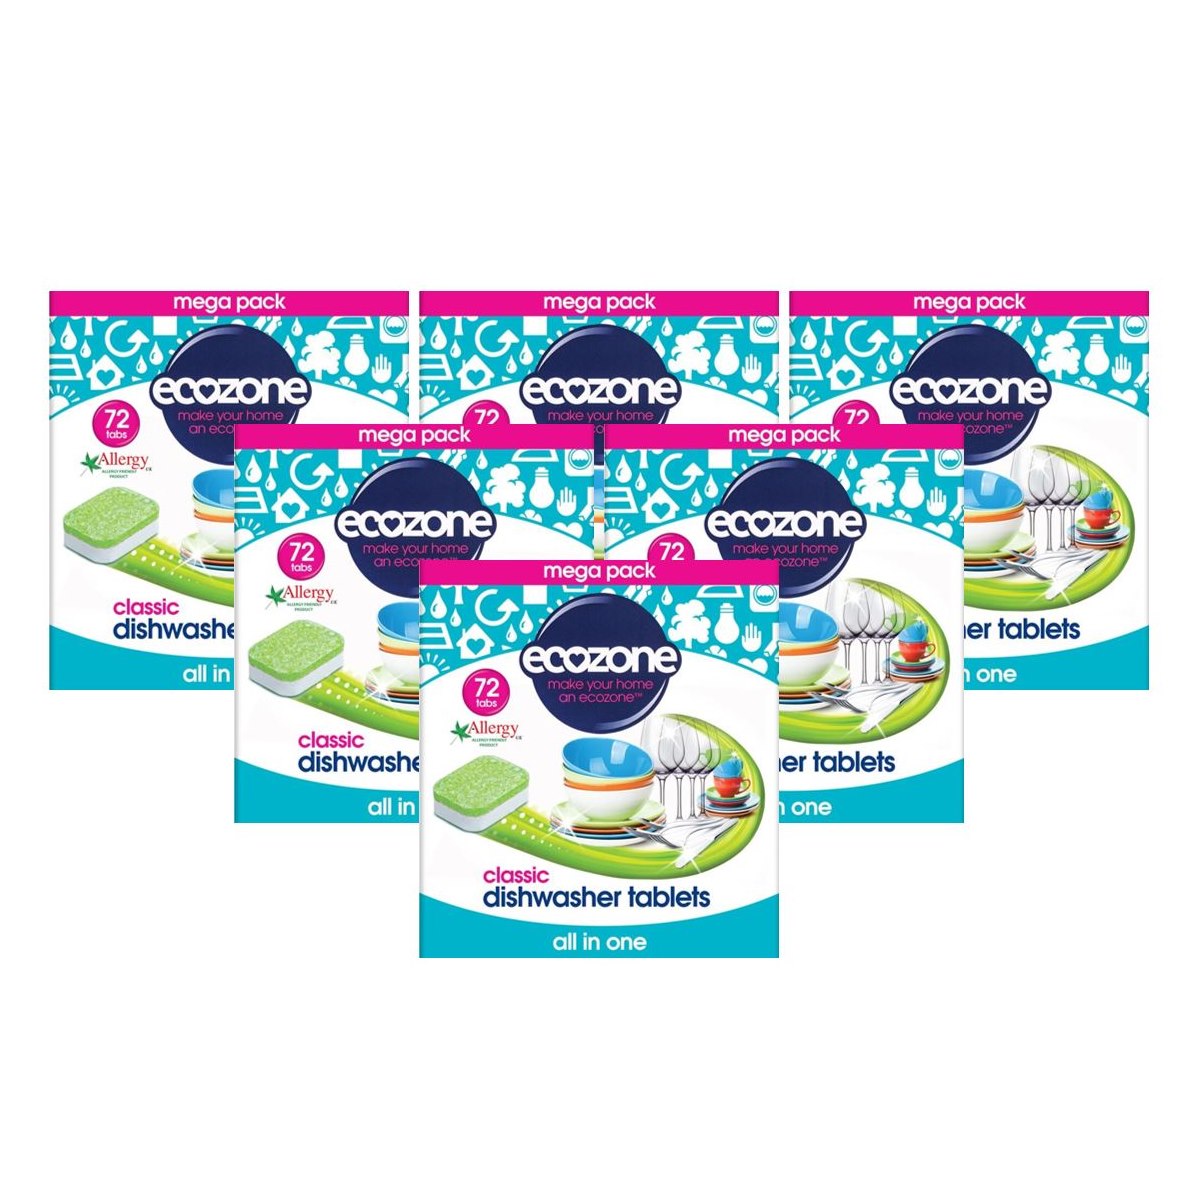 Case of 6 x Ecozone Classic Dishwasher Tablets All in One Pack of 72